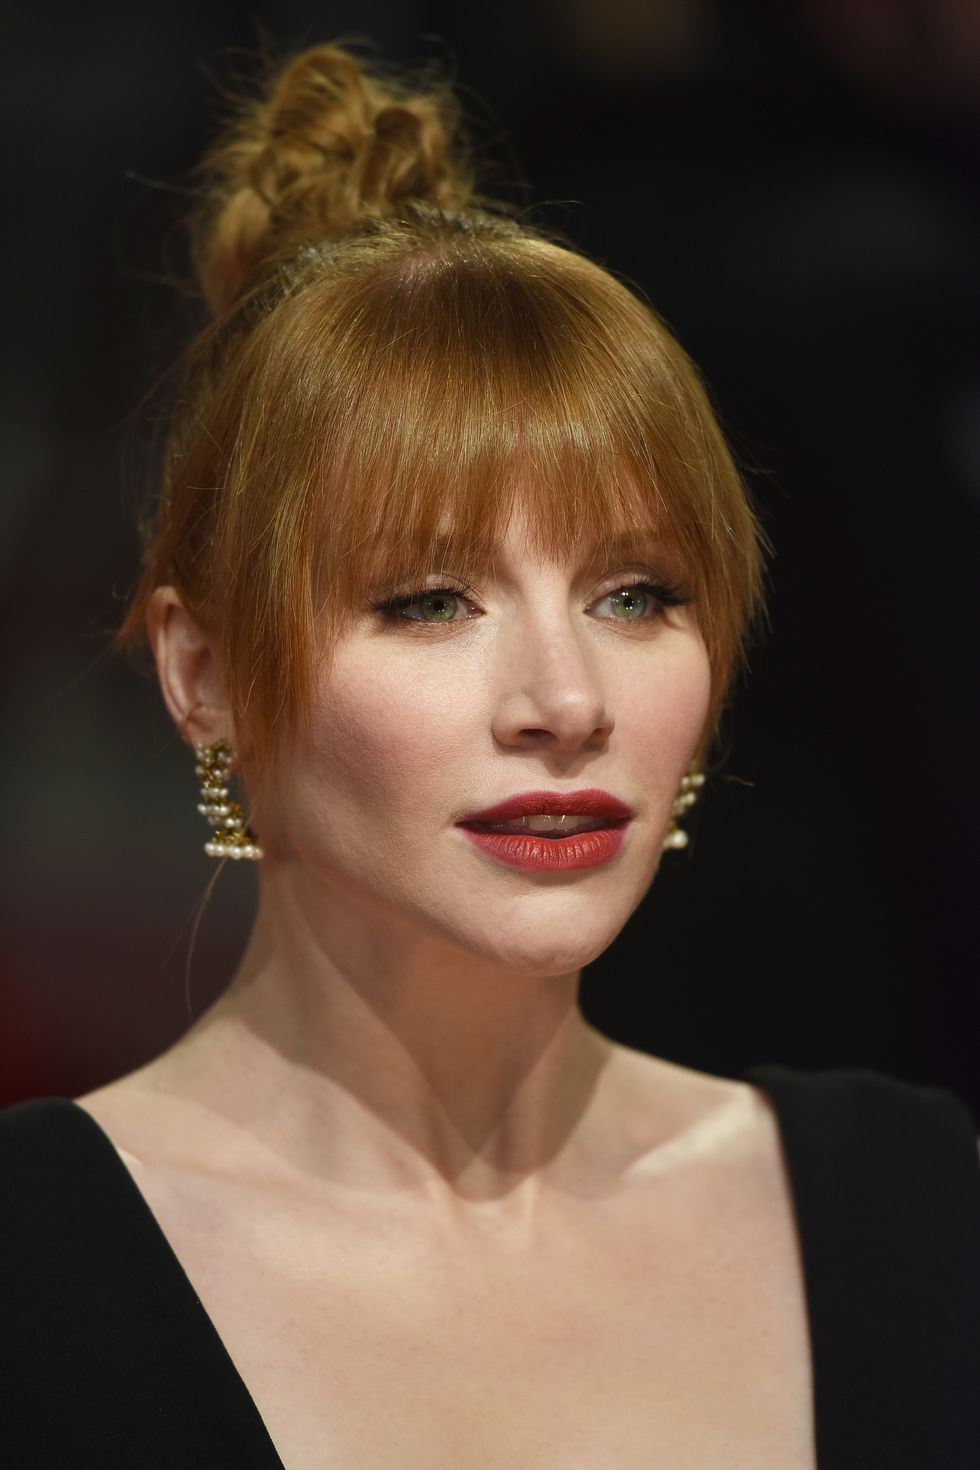 Bryce Dallas-Howard working a fringe at the 2017 BAFTAs.